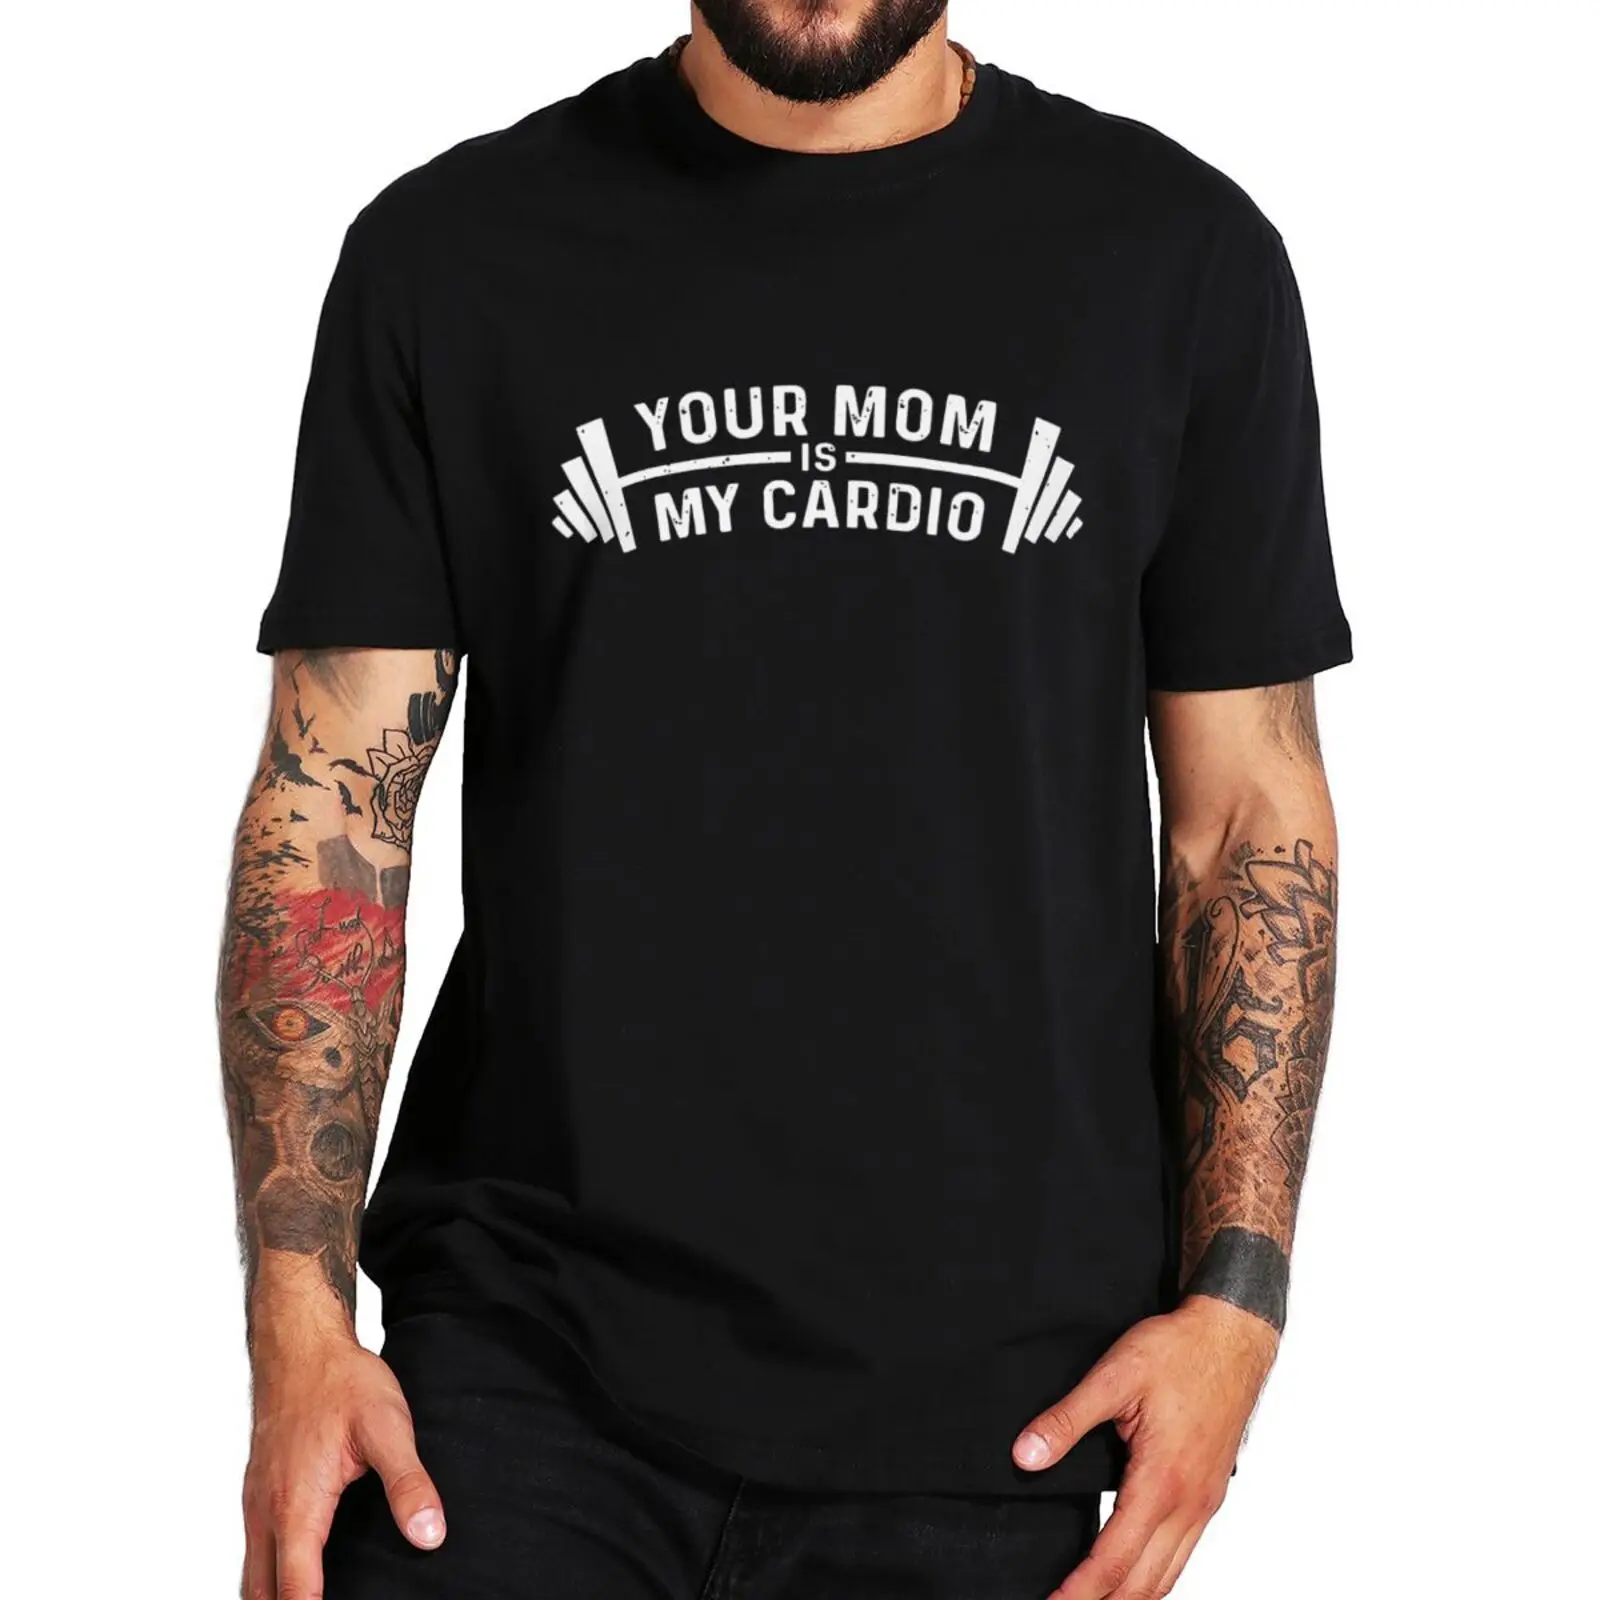 Your Mom Is My Cardio Funny T Shirt I Love Hot Moms MILF Sarcastic Funny Quote Tshirts 100% Cotton Oversize Gym Sports T-shirt